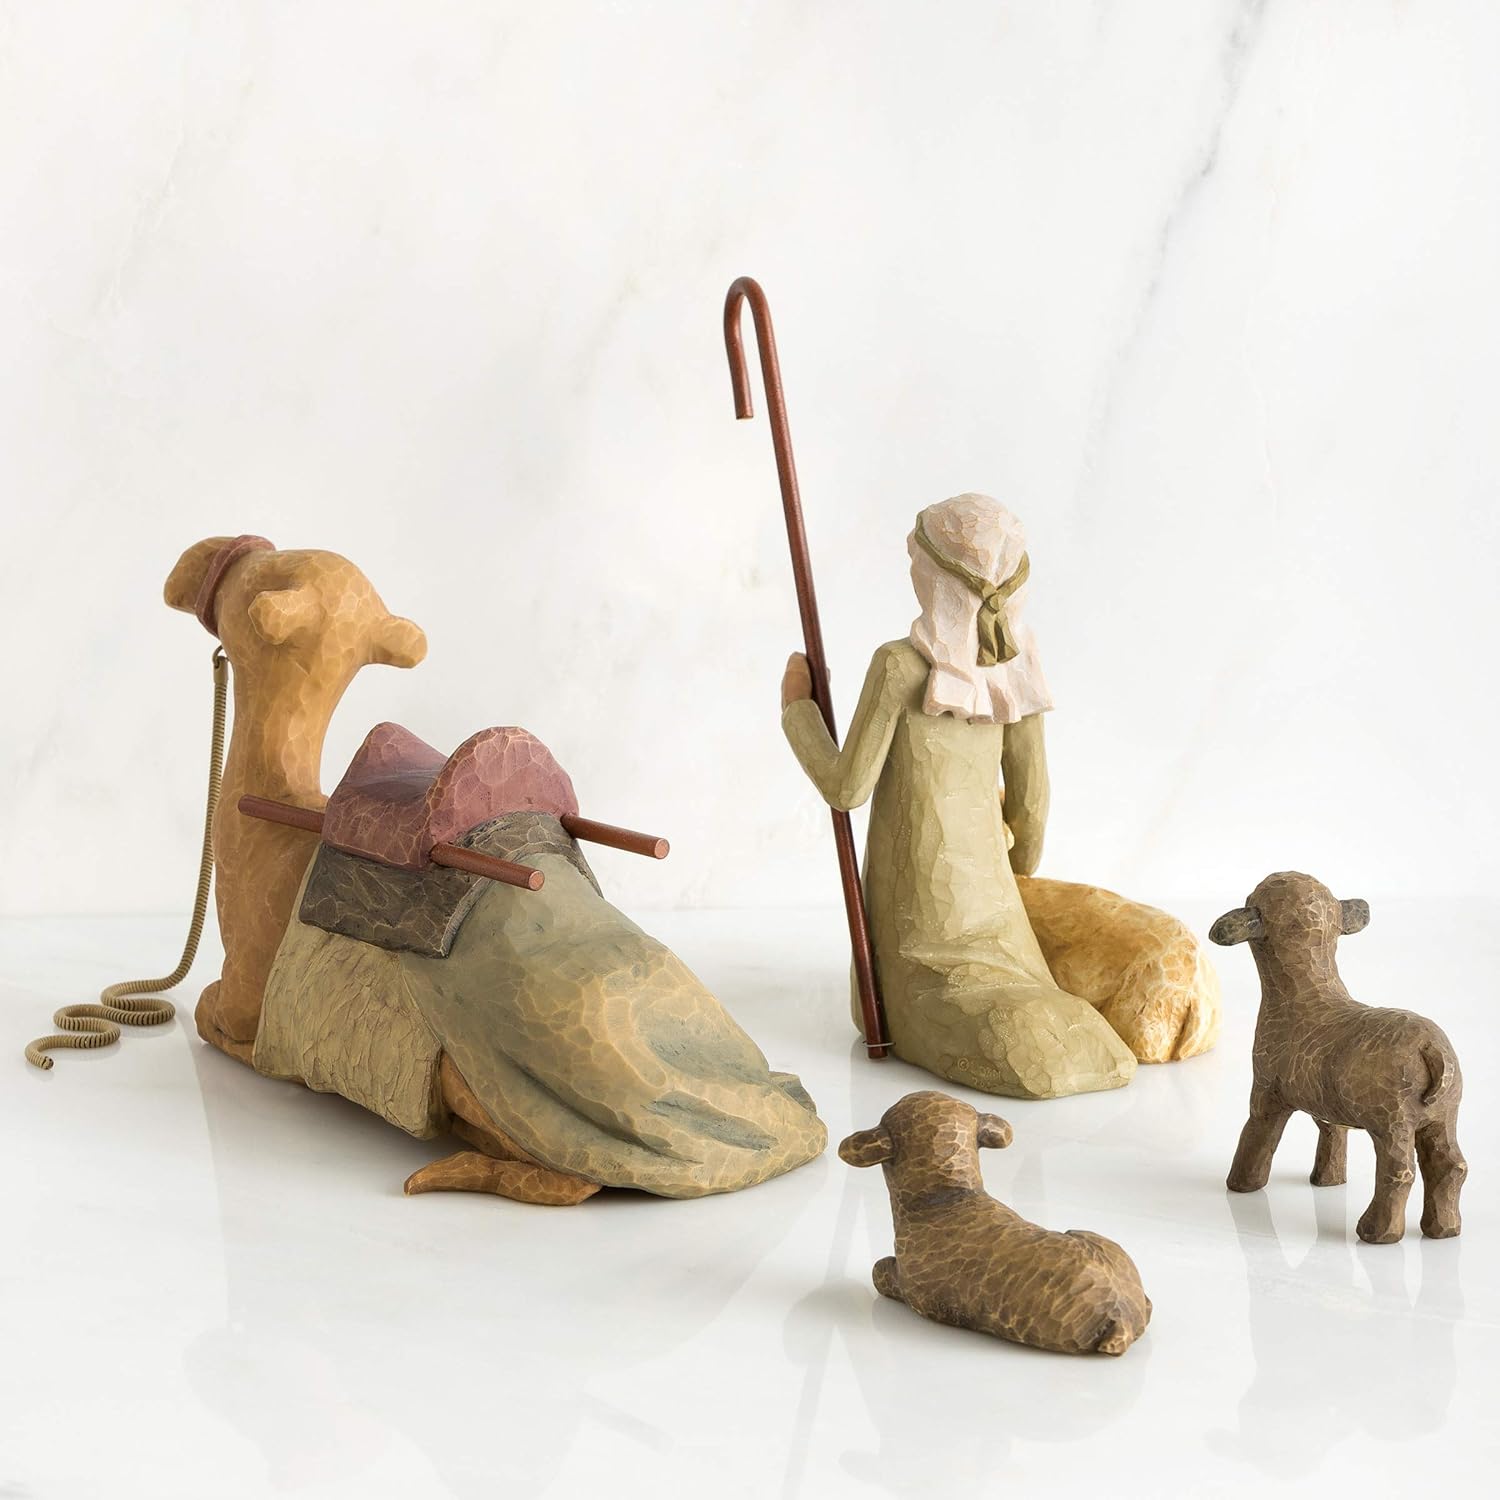 Shepherd and Stable Animals,Resin Crafts, Surrounding New Life with Love and Warmth - Cykapu